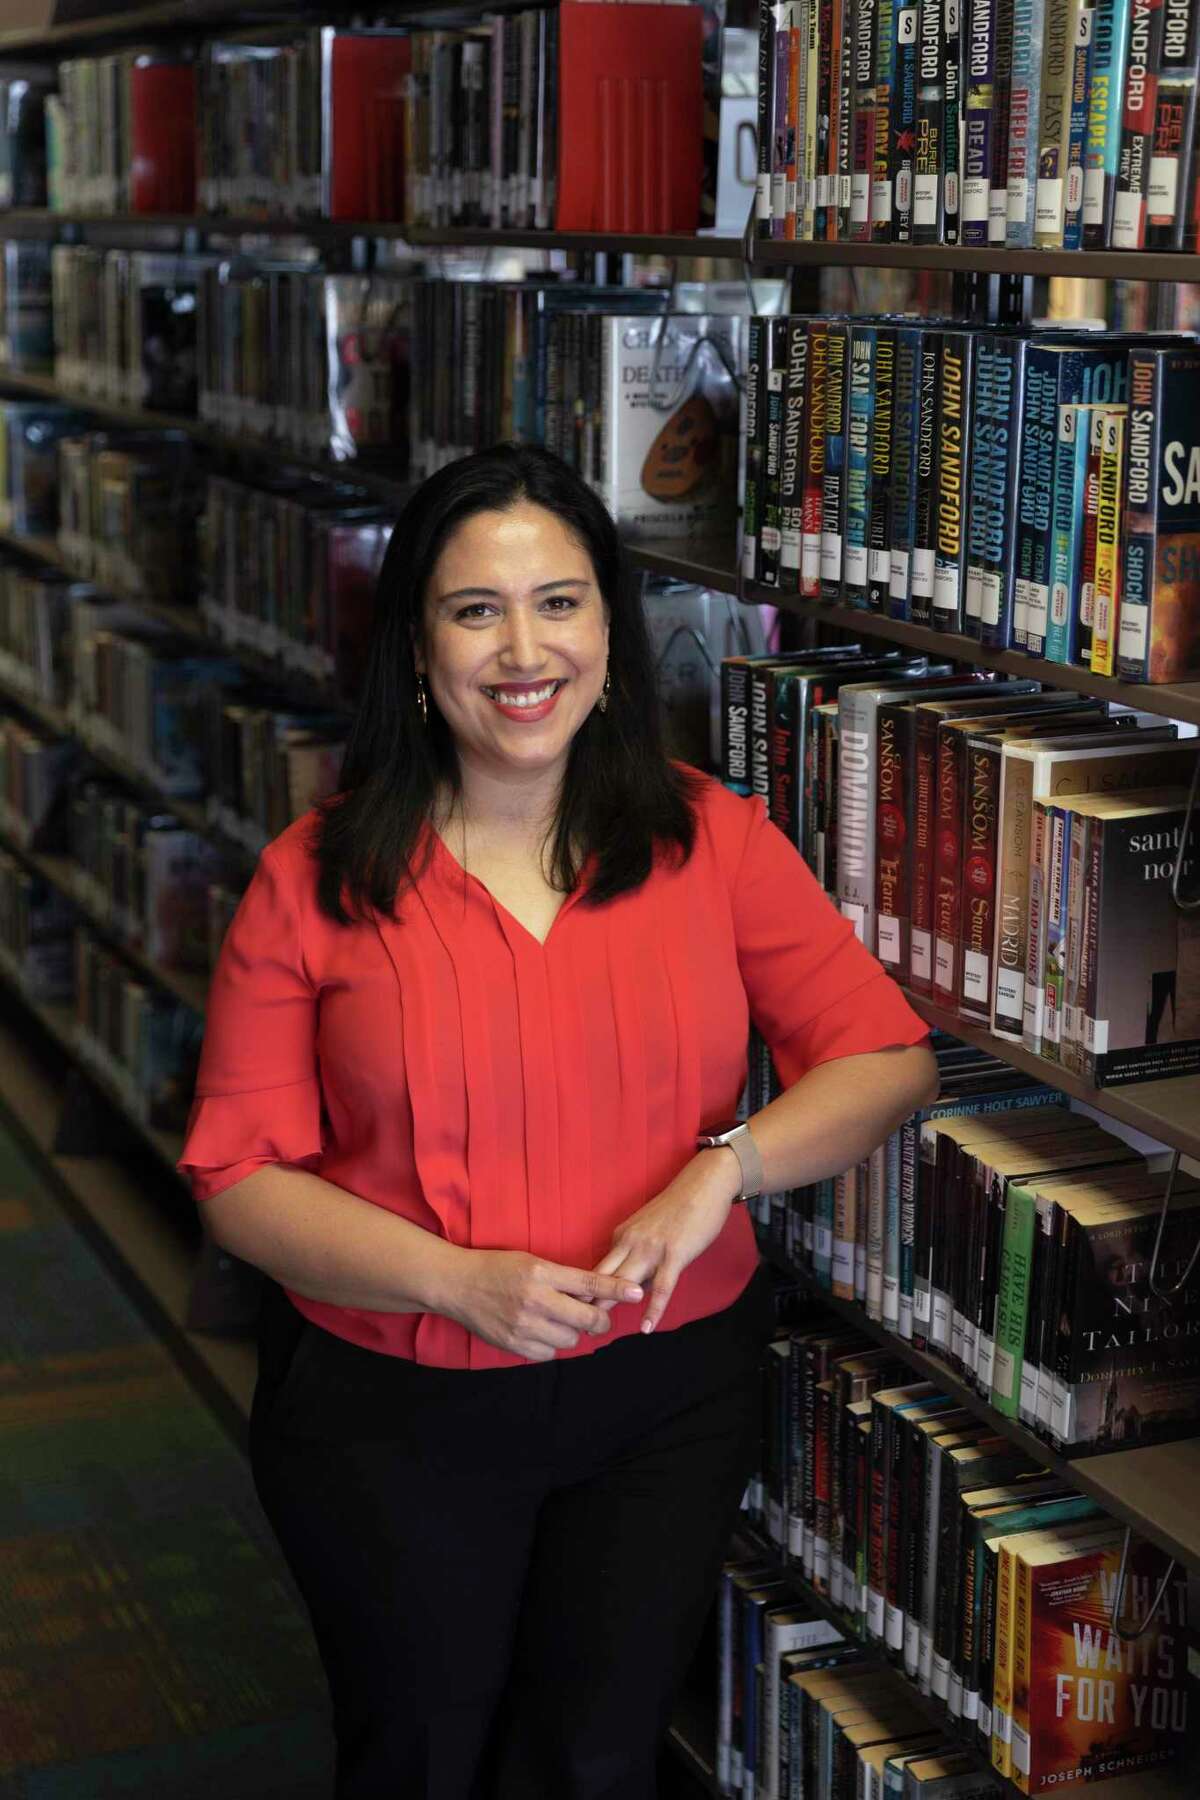 Lilly Gonzalez, a local author, is executive director of the San Antonio Book Festival, which begins May 21.